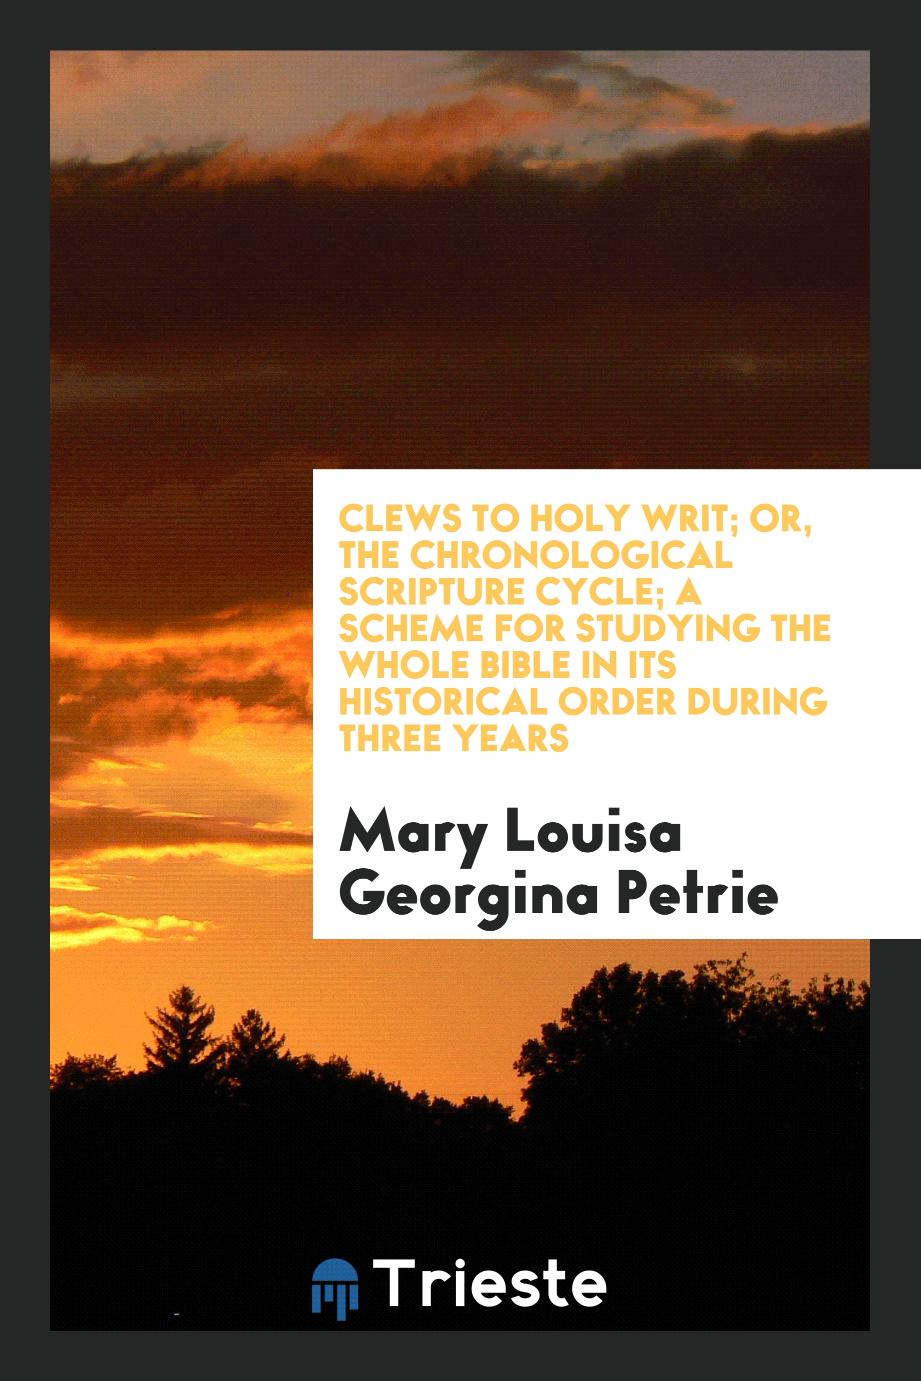 Mary Louisa Georgina Petrie - Clews to Holy Writ; Or, The Chronological Scripture Cycle; A Scheme for Studying the Whole Bible in Its Historical Order During Three Years